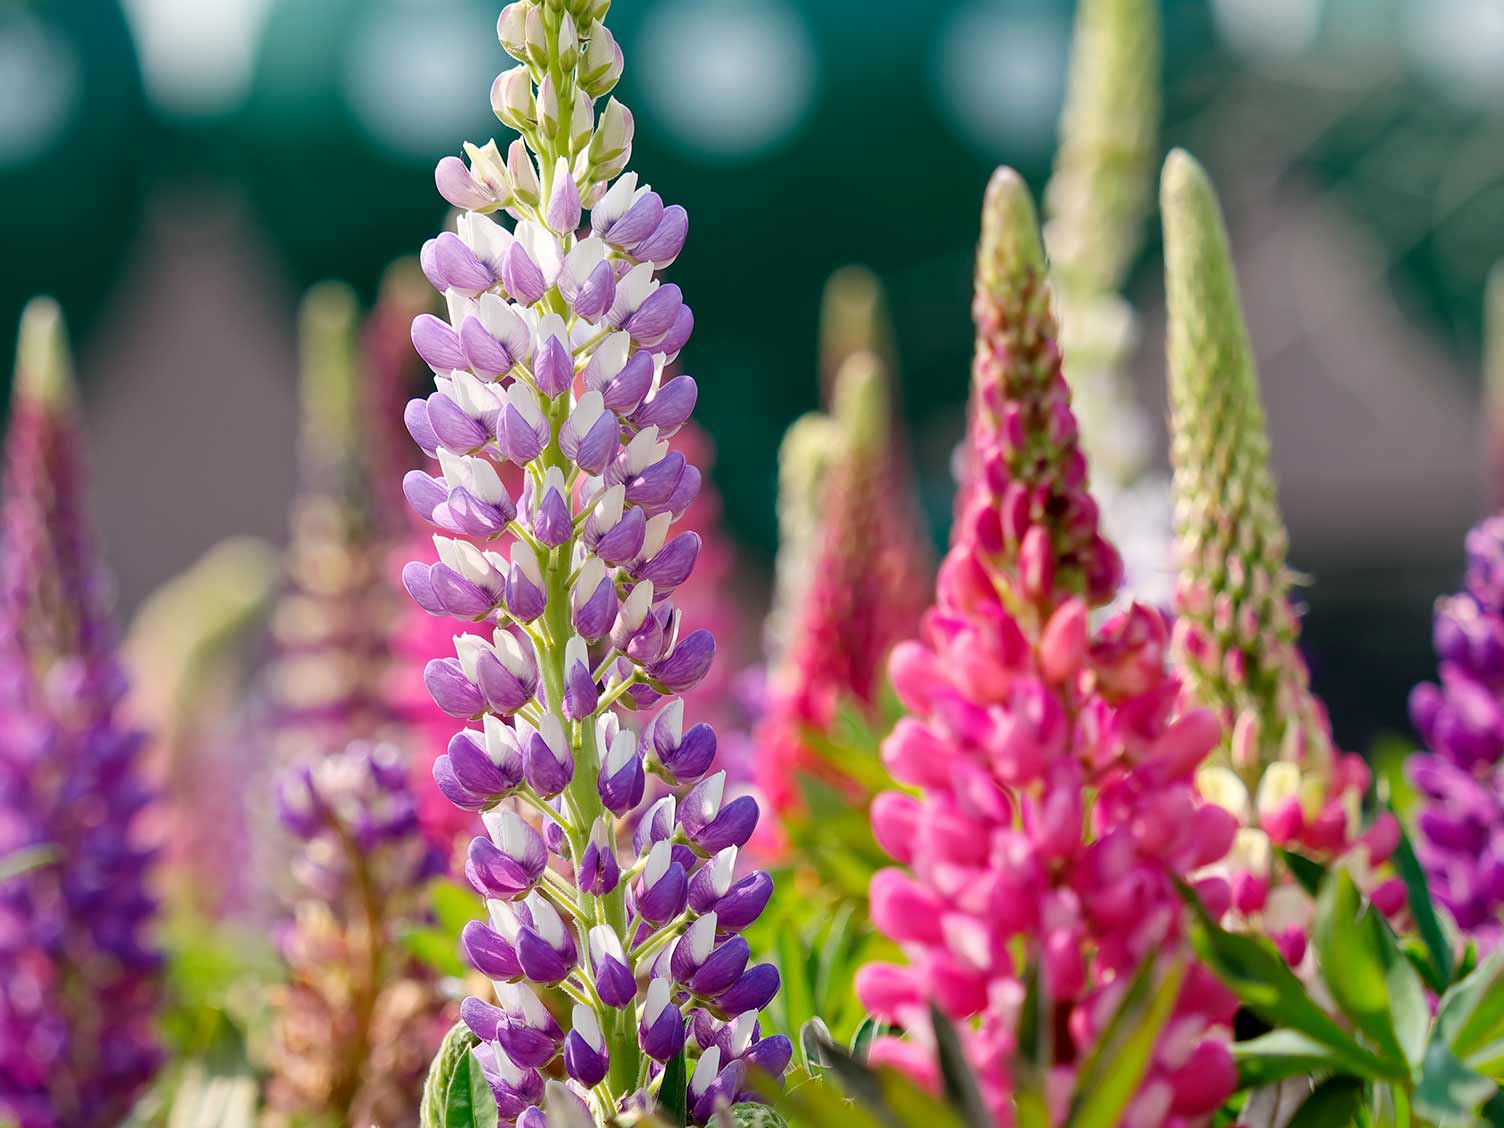 Lupin Flower Meaning: Growth, Protection and Strength